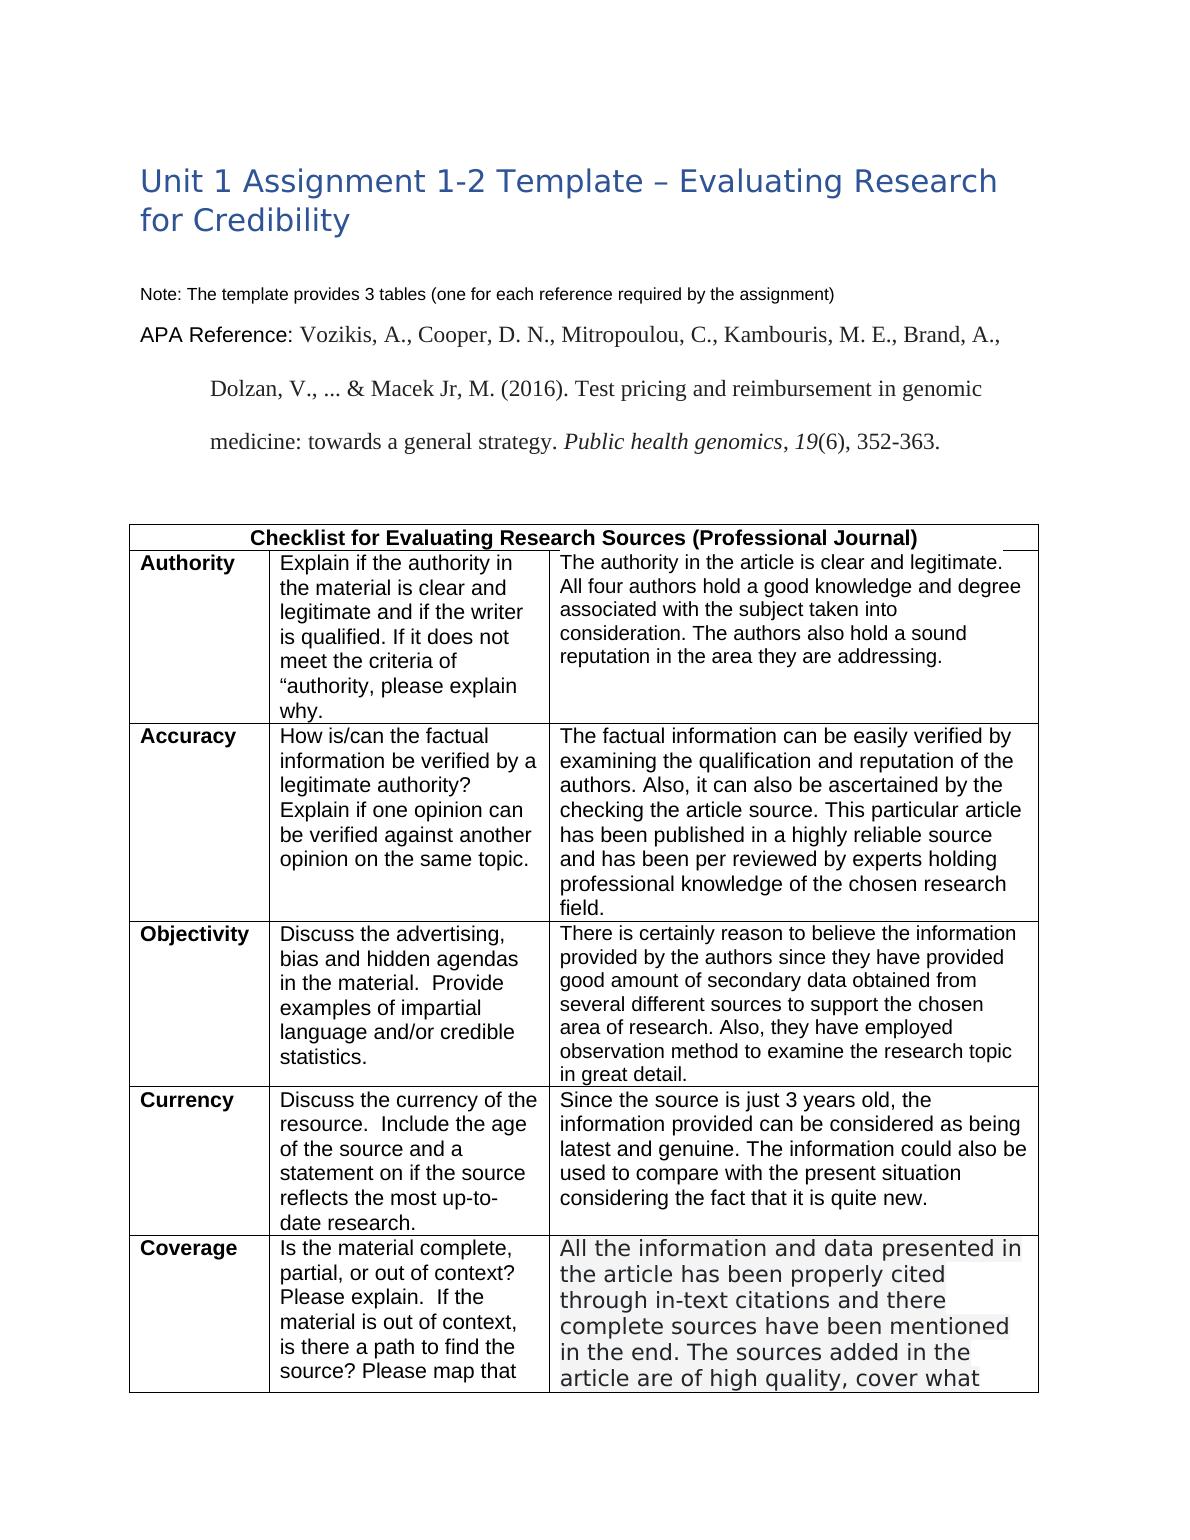 Unit 1 Assignment 1-2 Template – Evaluating Research for Credibility_1